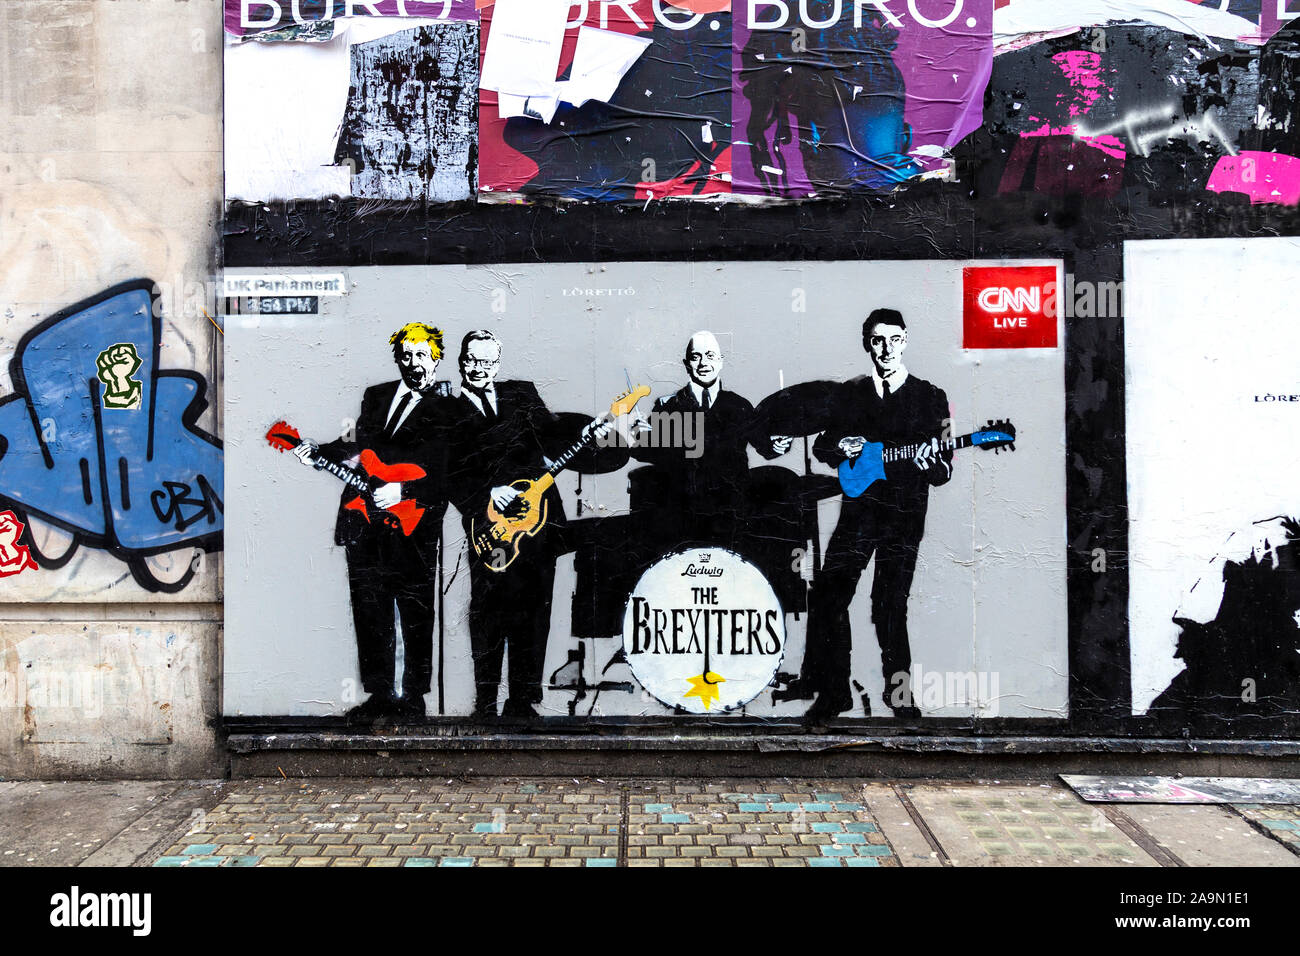 Brexit mural by Loretto with Boris Johnson, Michael Gove, Sajid Javid and Jacob Rees-Mogg The Brexiters band, Great Marlborough Street, London, UK Stock Photo